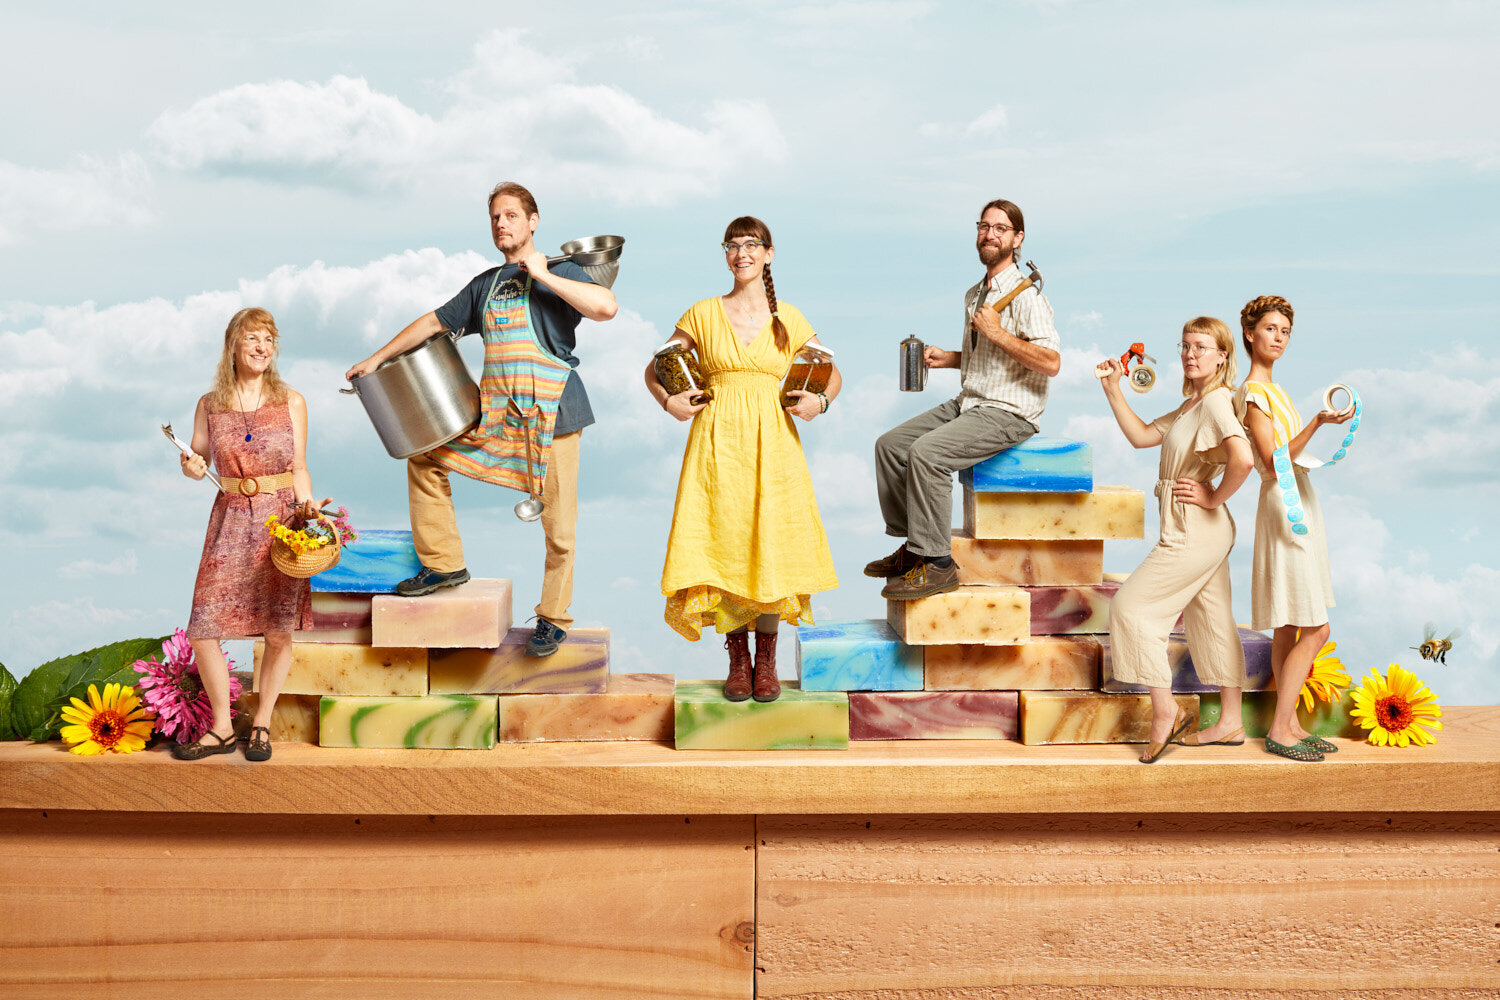 conceptual team portrait of home and body care company LuSa Organics showing team members standing on giant soap blocks composited together by conceptual photographer Hanna Agar